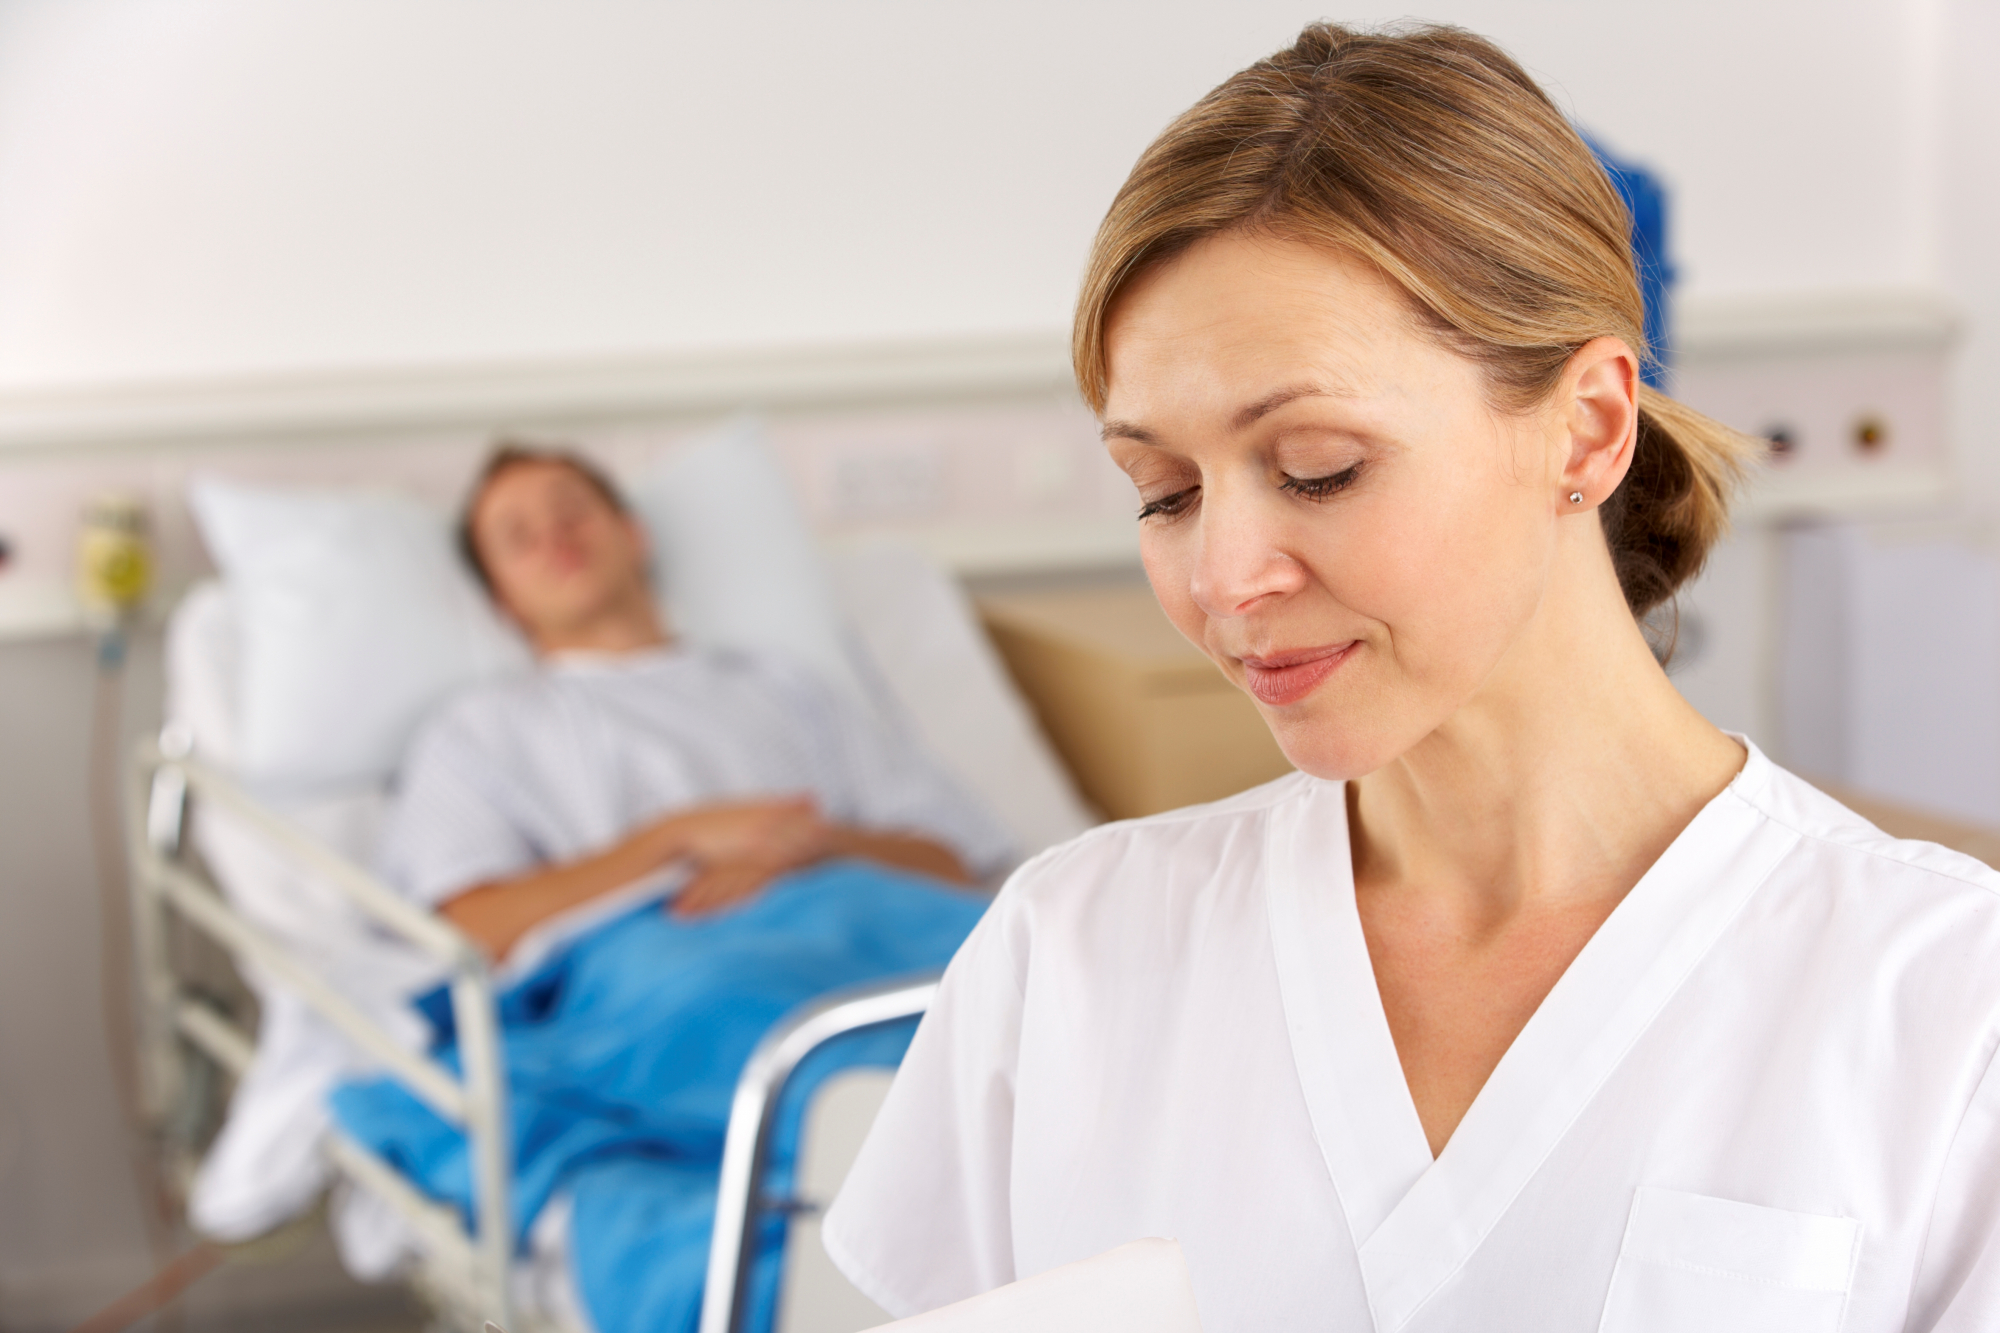 Image of Doctor at hospital with patient